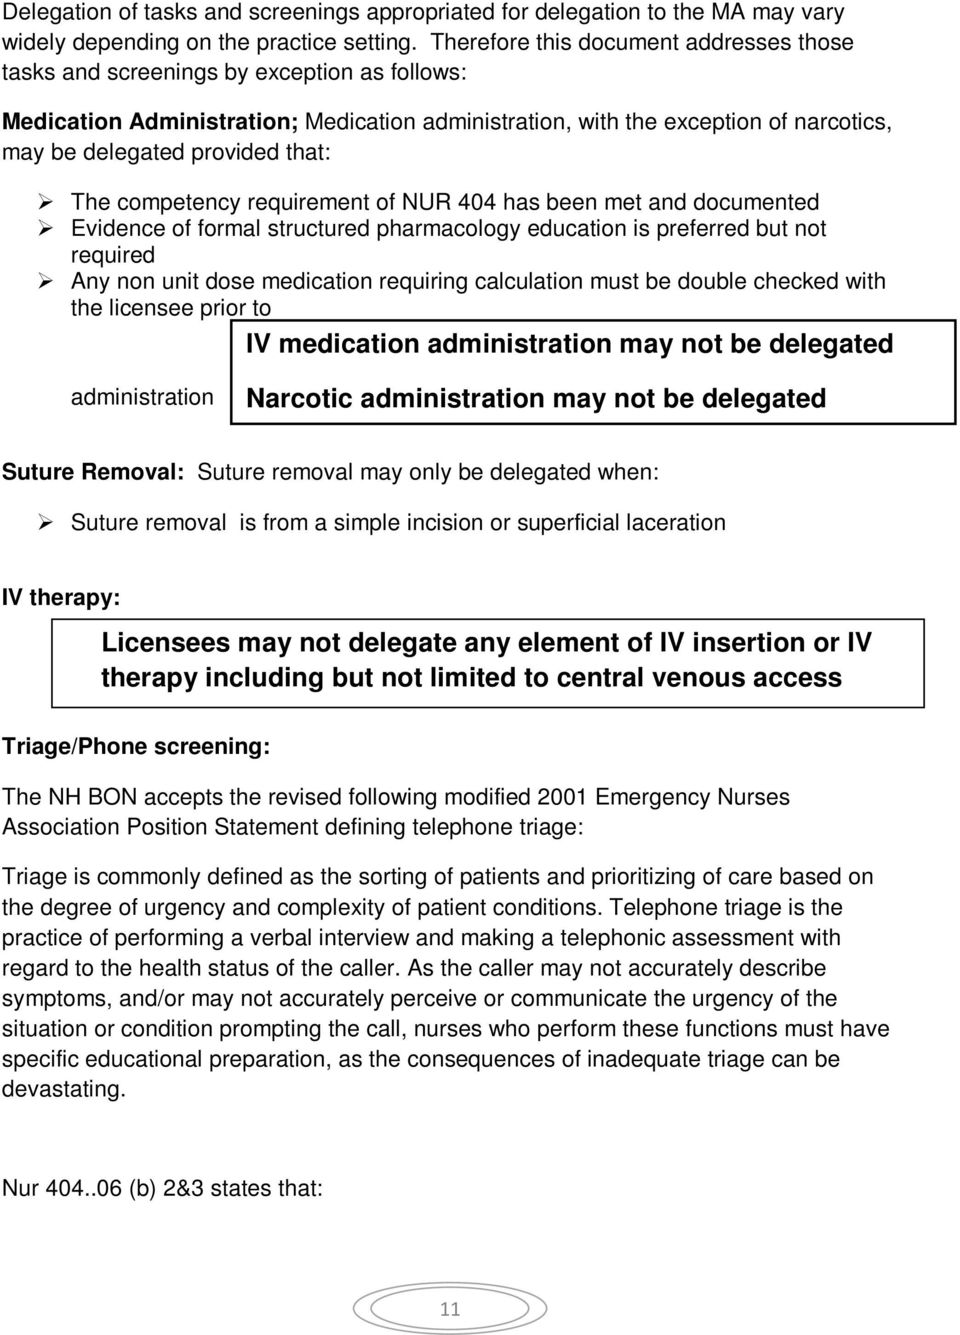 that: The competency requirement of NUR 404 has been met and documented Evidence of formal structured pharmacology education is preferred but not required Any non unit dose medication requiring